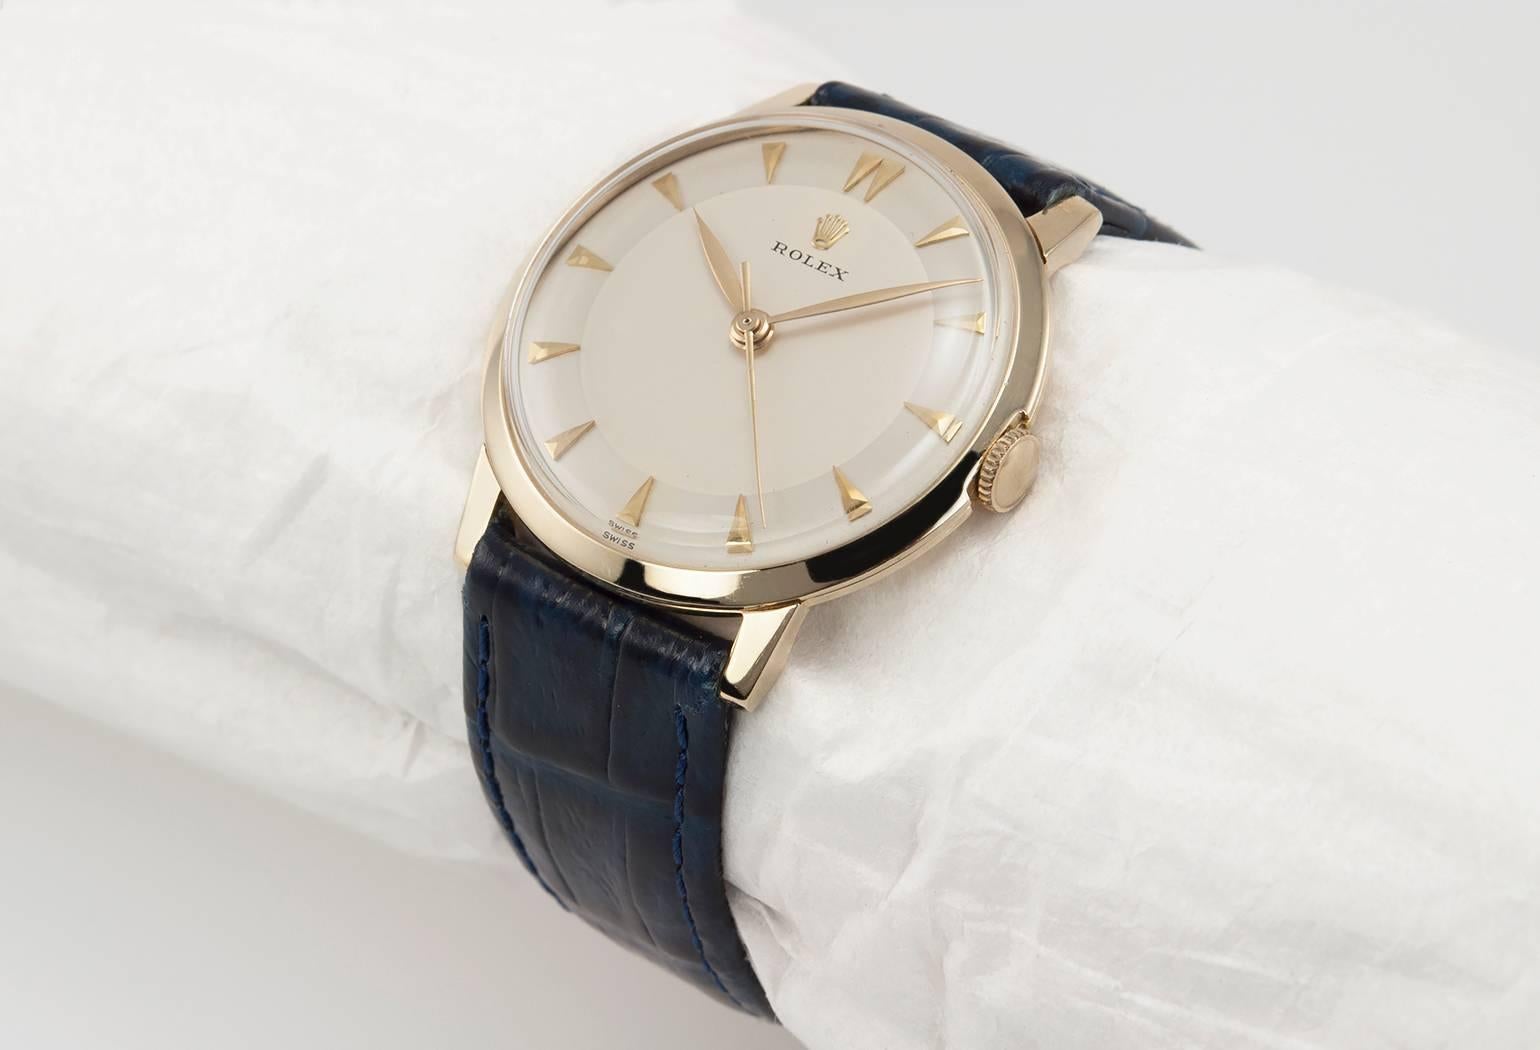 Rolex dress watch in 14 karat yellow gold, reference 0066. This 1960's Rolex watch is simple and chic. It has a 17 jewel mechanical movement, original dial, plastic crystal, with a new blue leather strap. Circa 1968. This case measures approximately